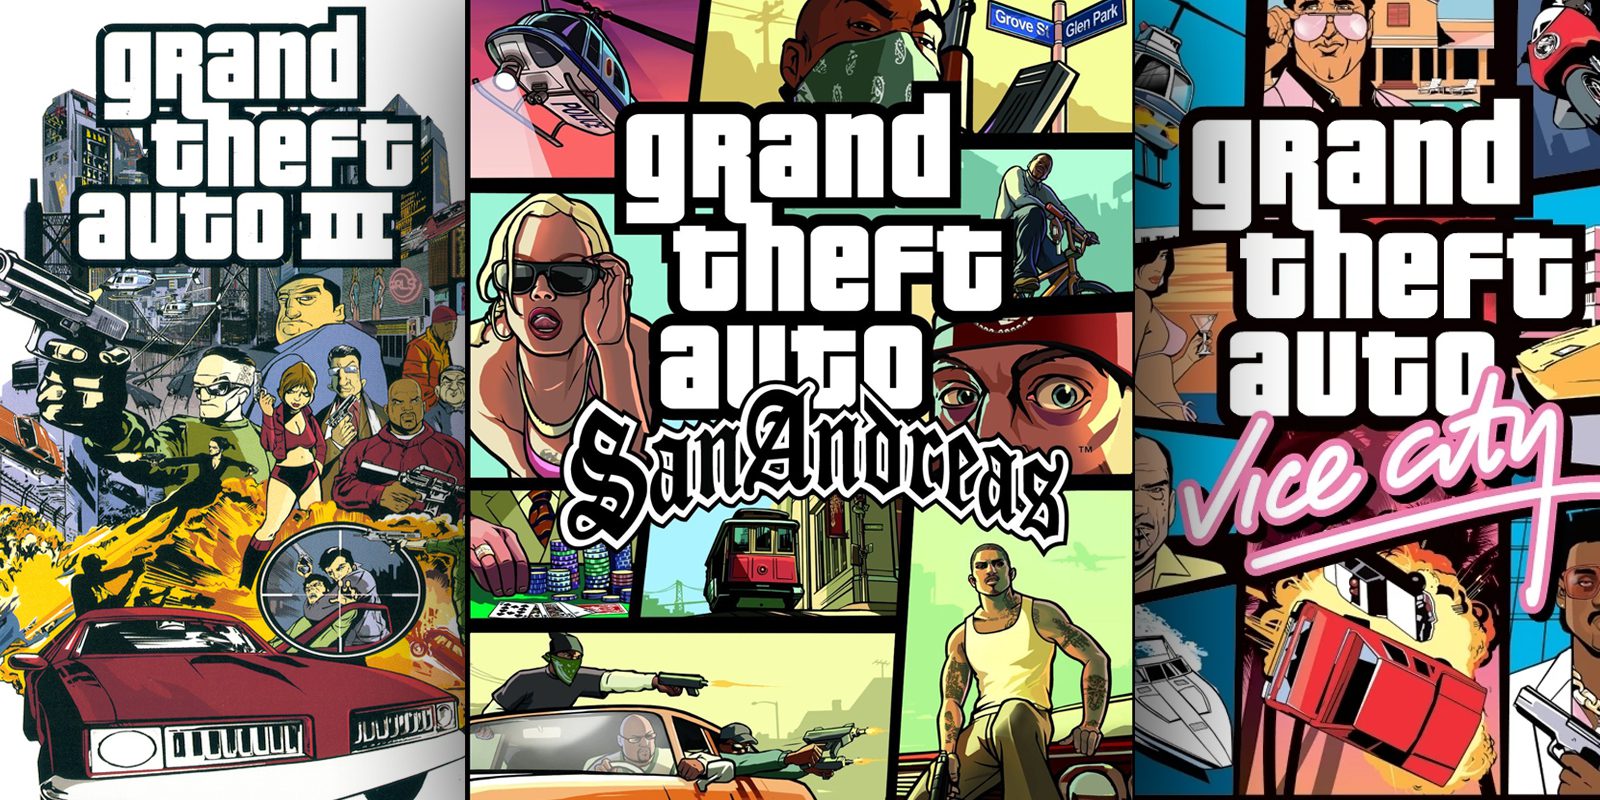 grand theft auto the trilogy the definitive edition nintendo switch download free